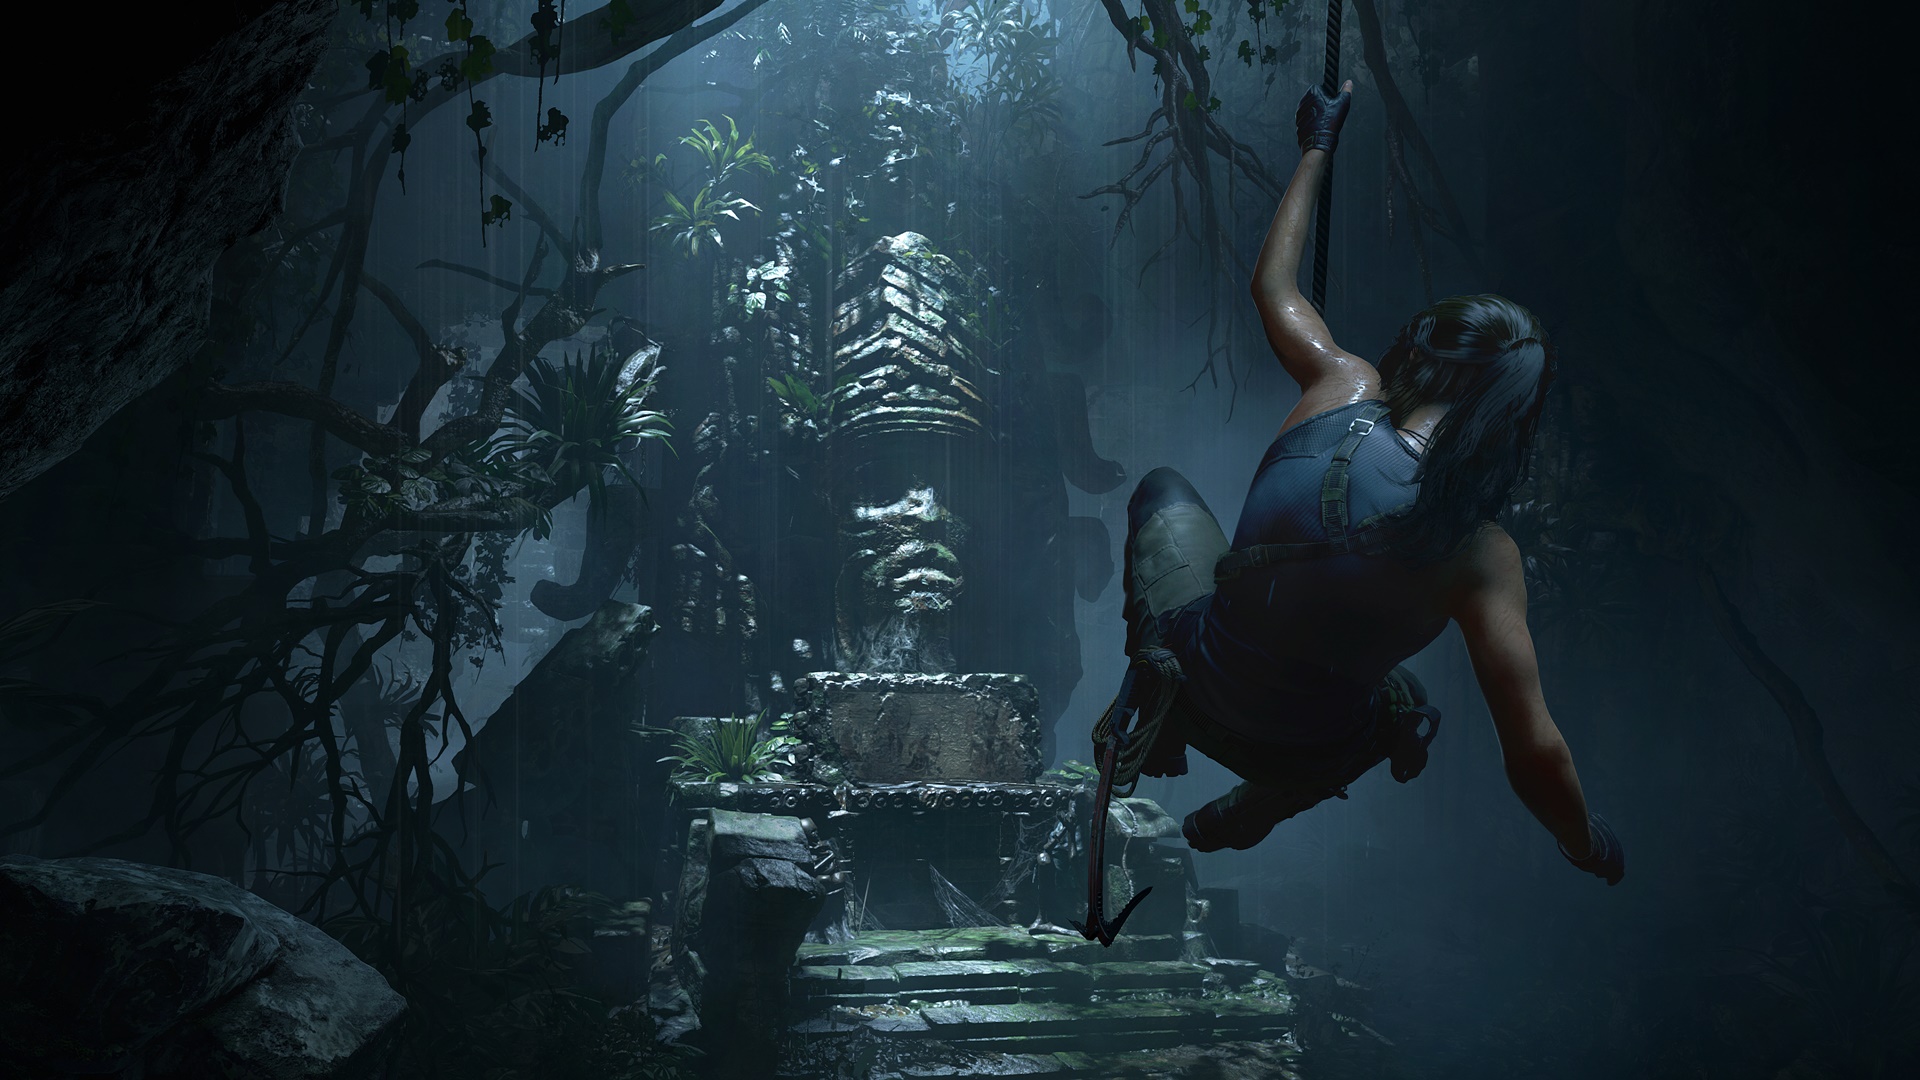 Tomb Raider, Assassin's Creed and Why Netflix Is the Best Place